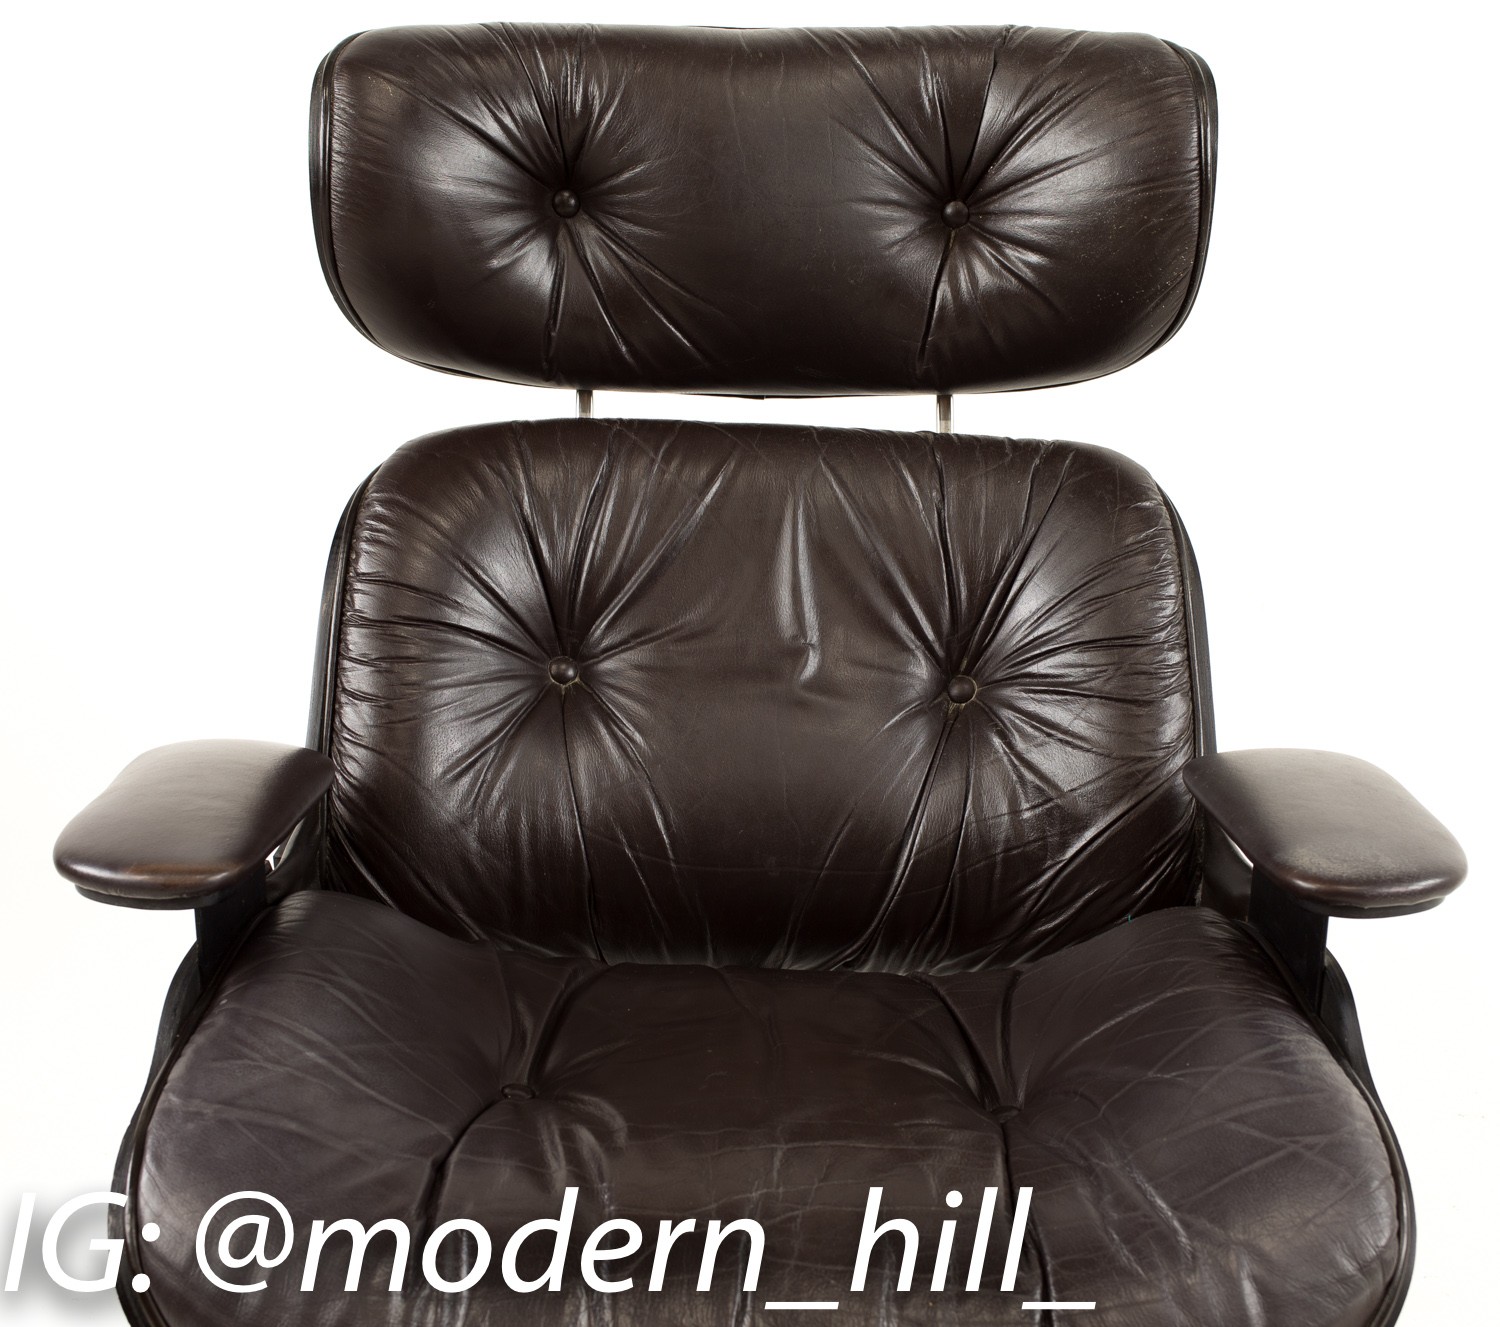 Plycraft Dark Brown Leather Lounge Chair and Ottoman